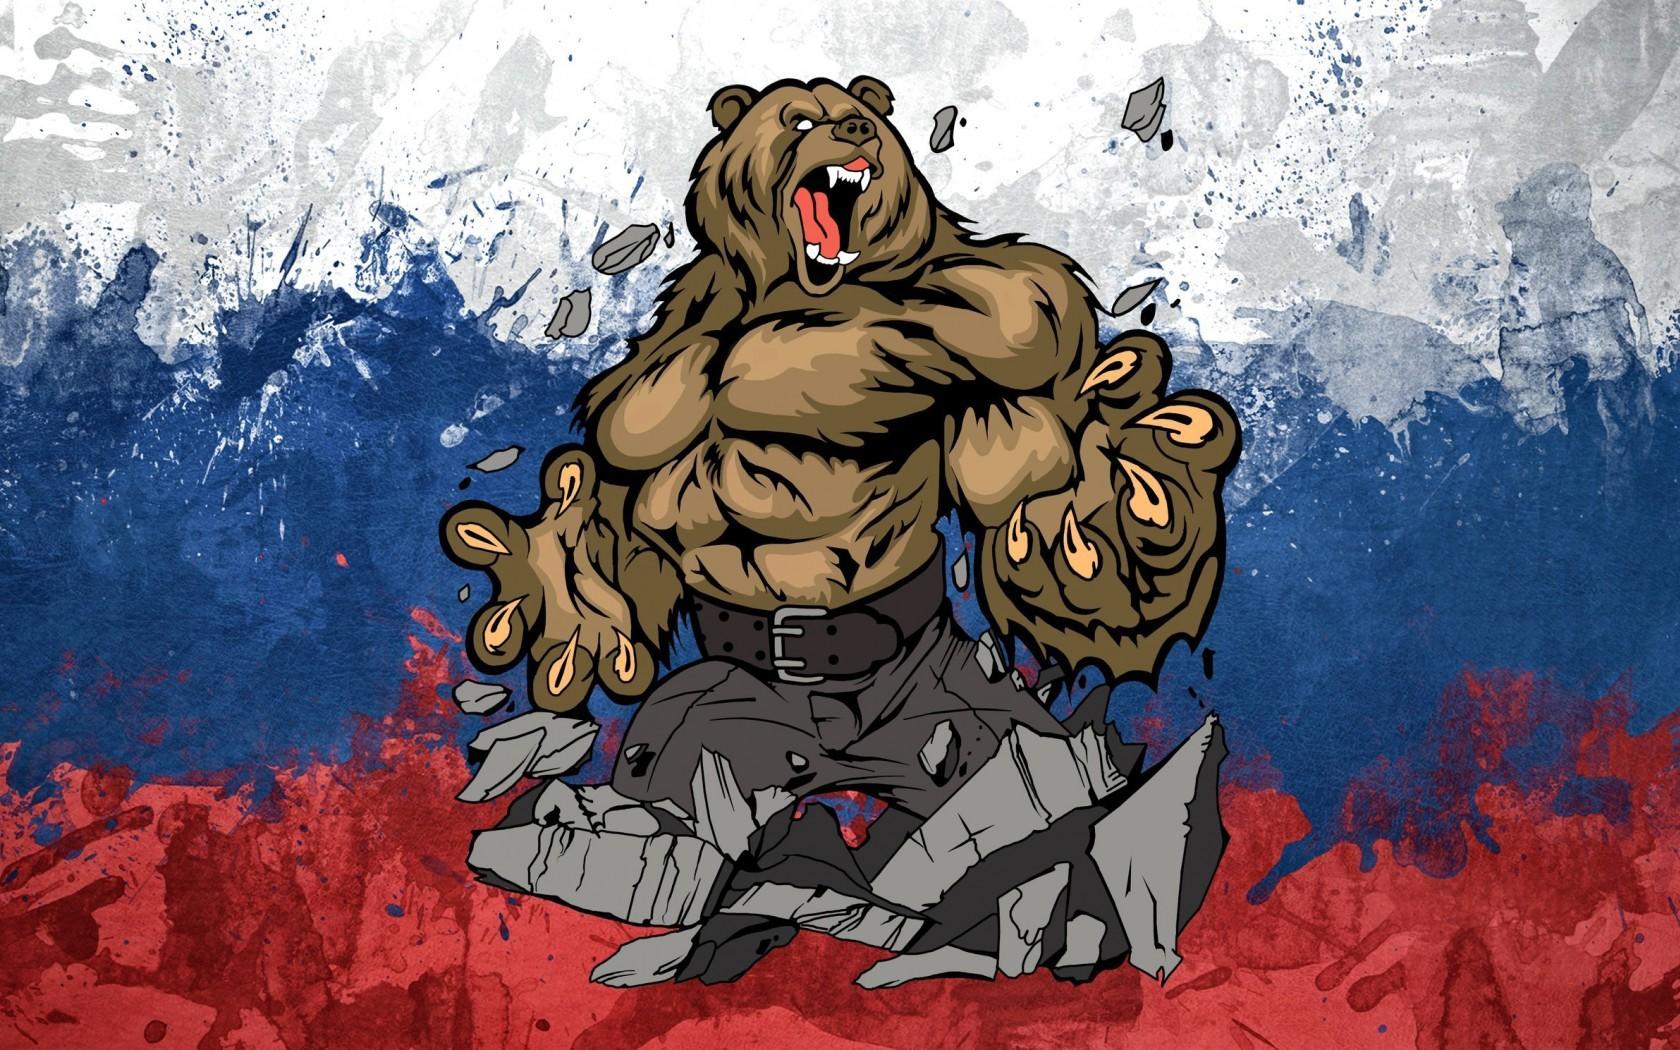 Русский Медведь For Android - APK Download